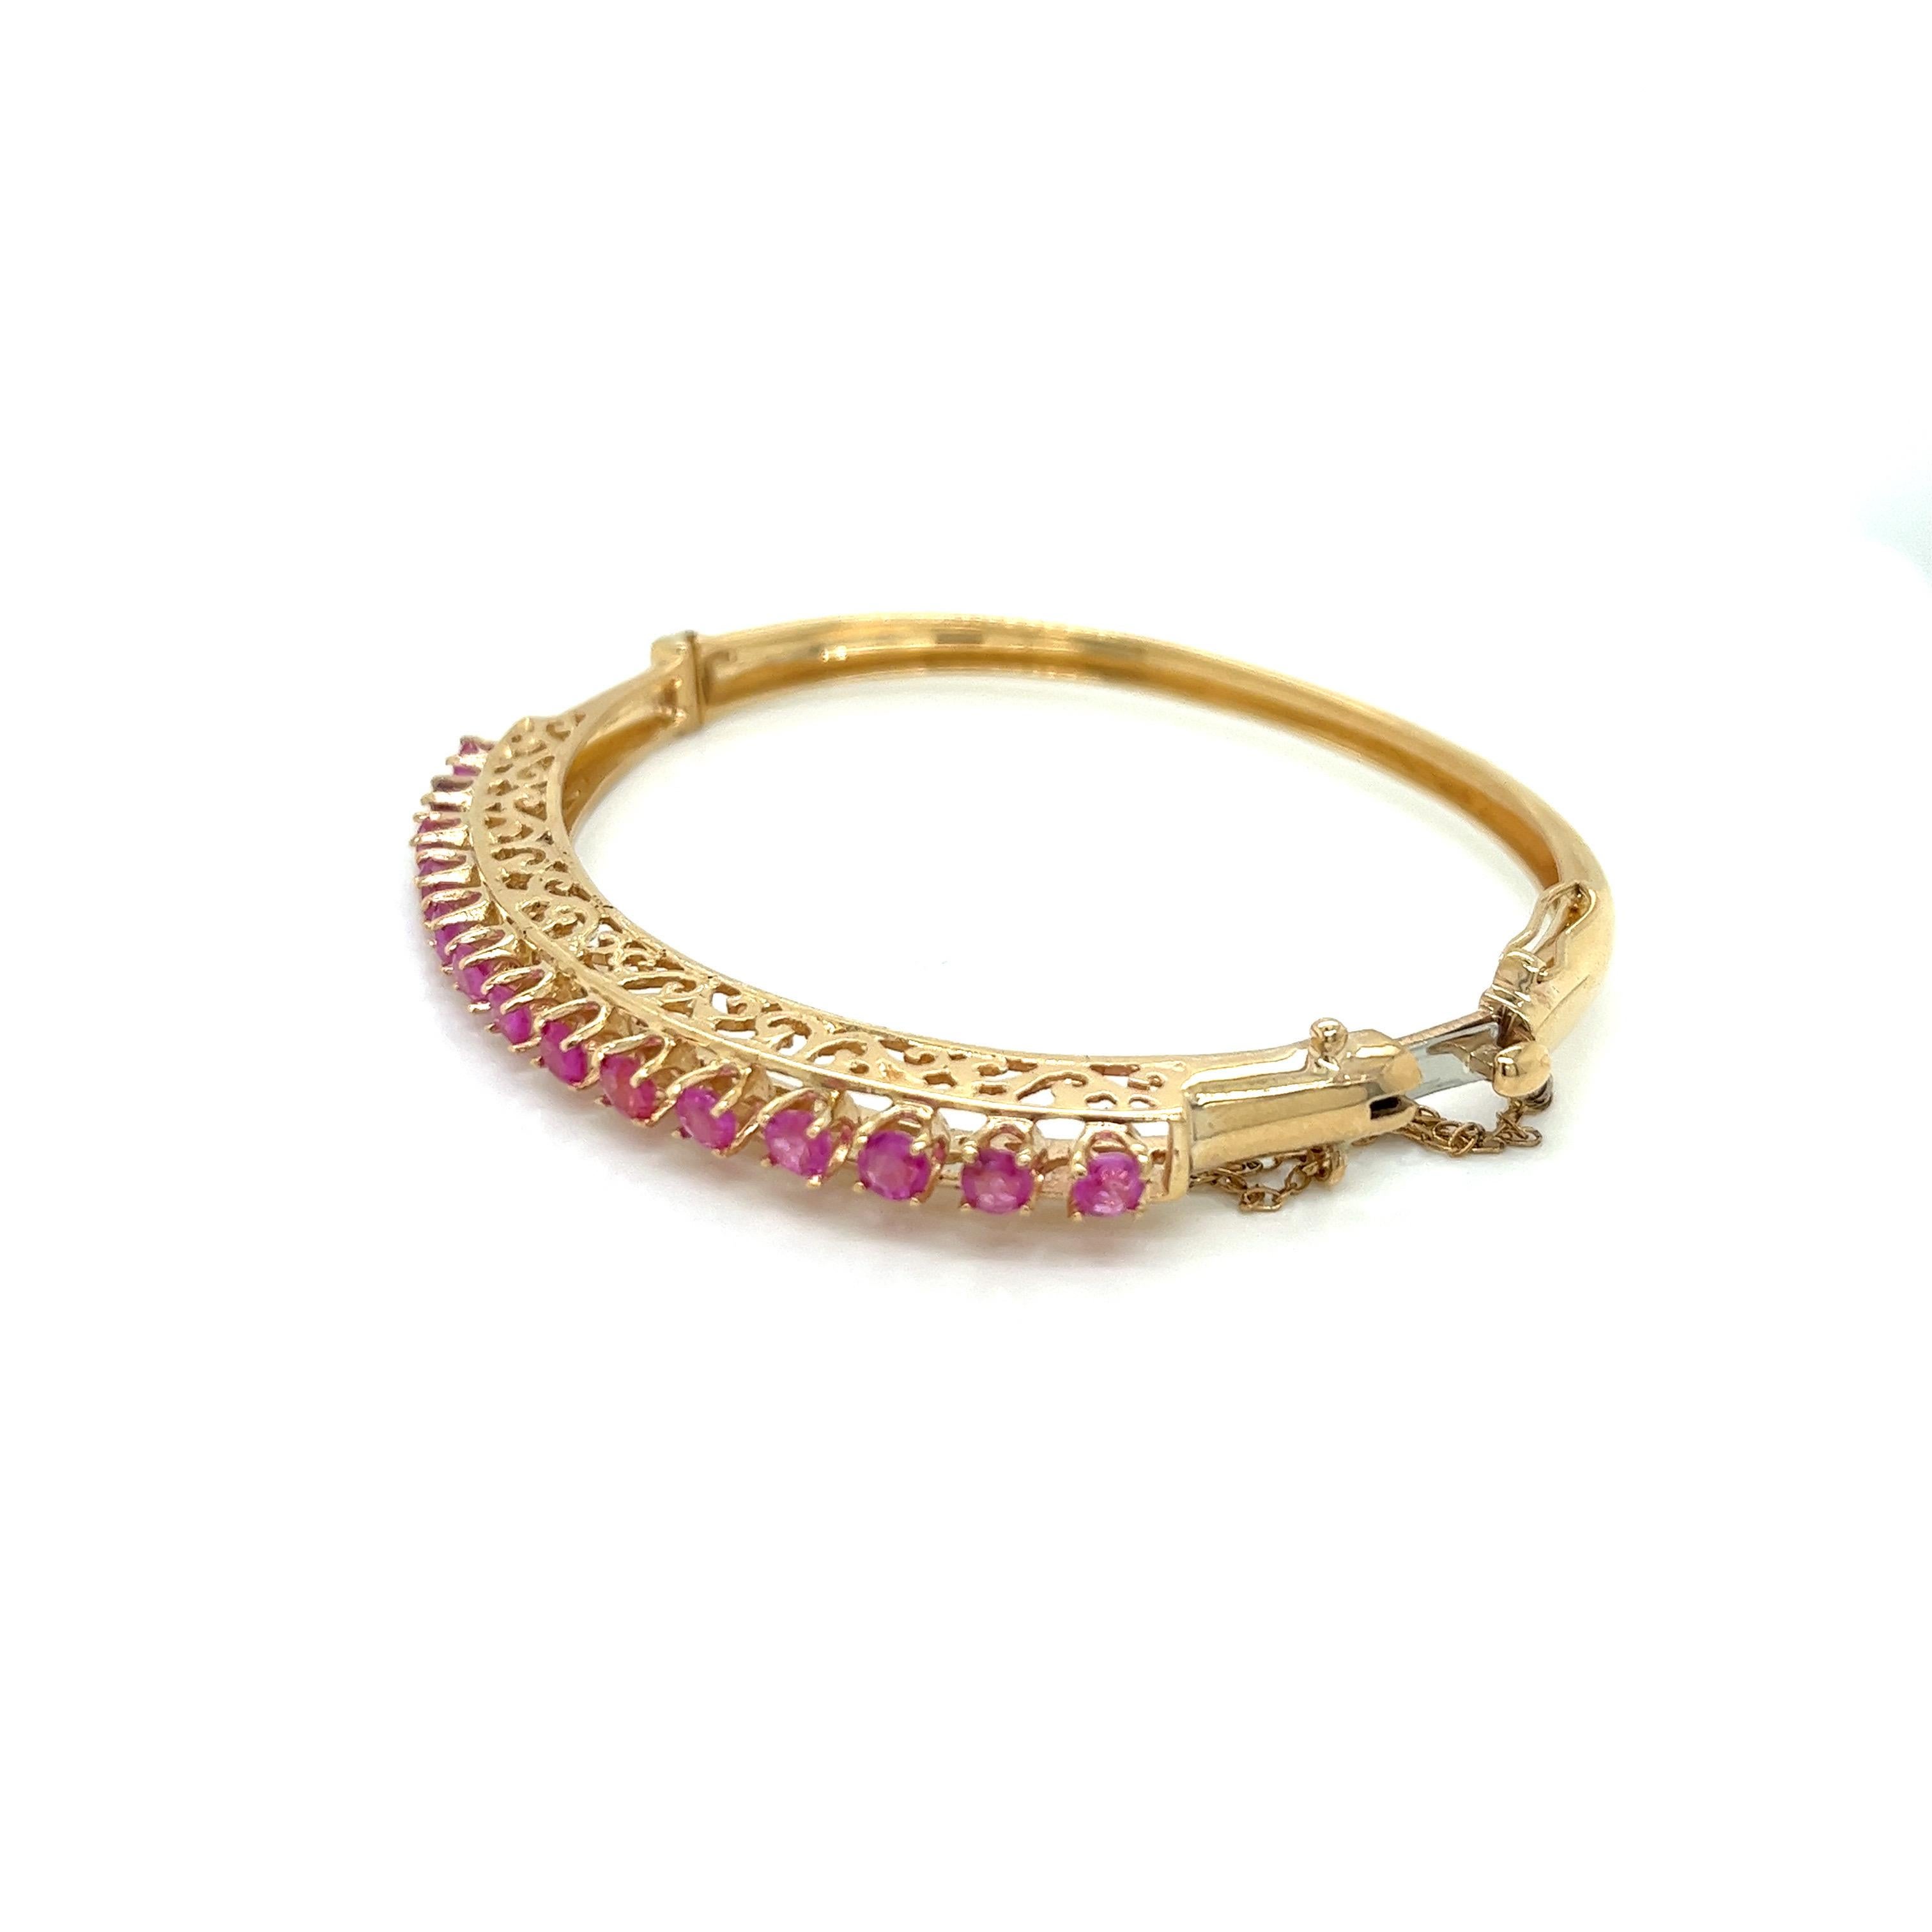 Vintage 1950's 14K Yellow Gold Ruby Bangle Bracelet - The bangle is set with 14 round light color rubies weighing approximately 2.50ct total weight. The measurement of the rubies across the top is 2.25